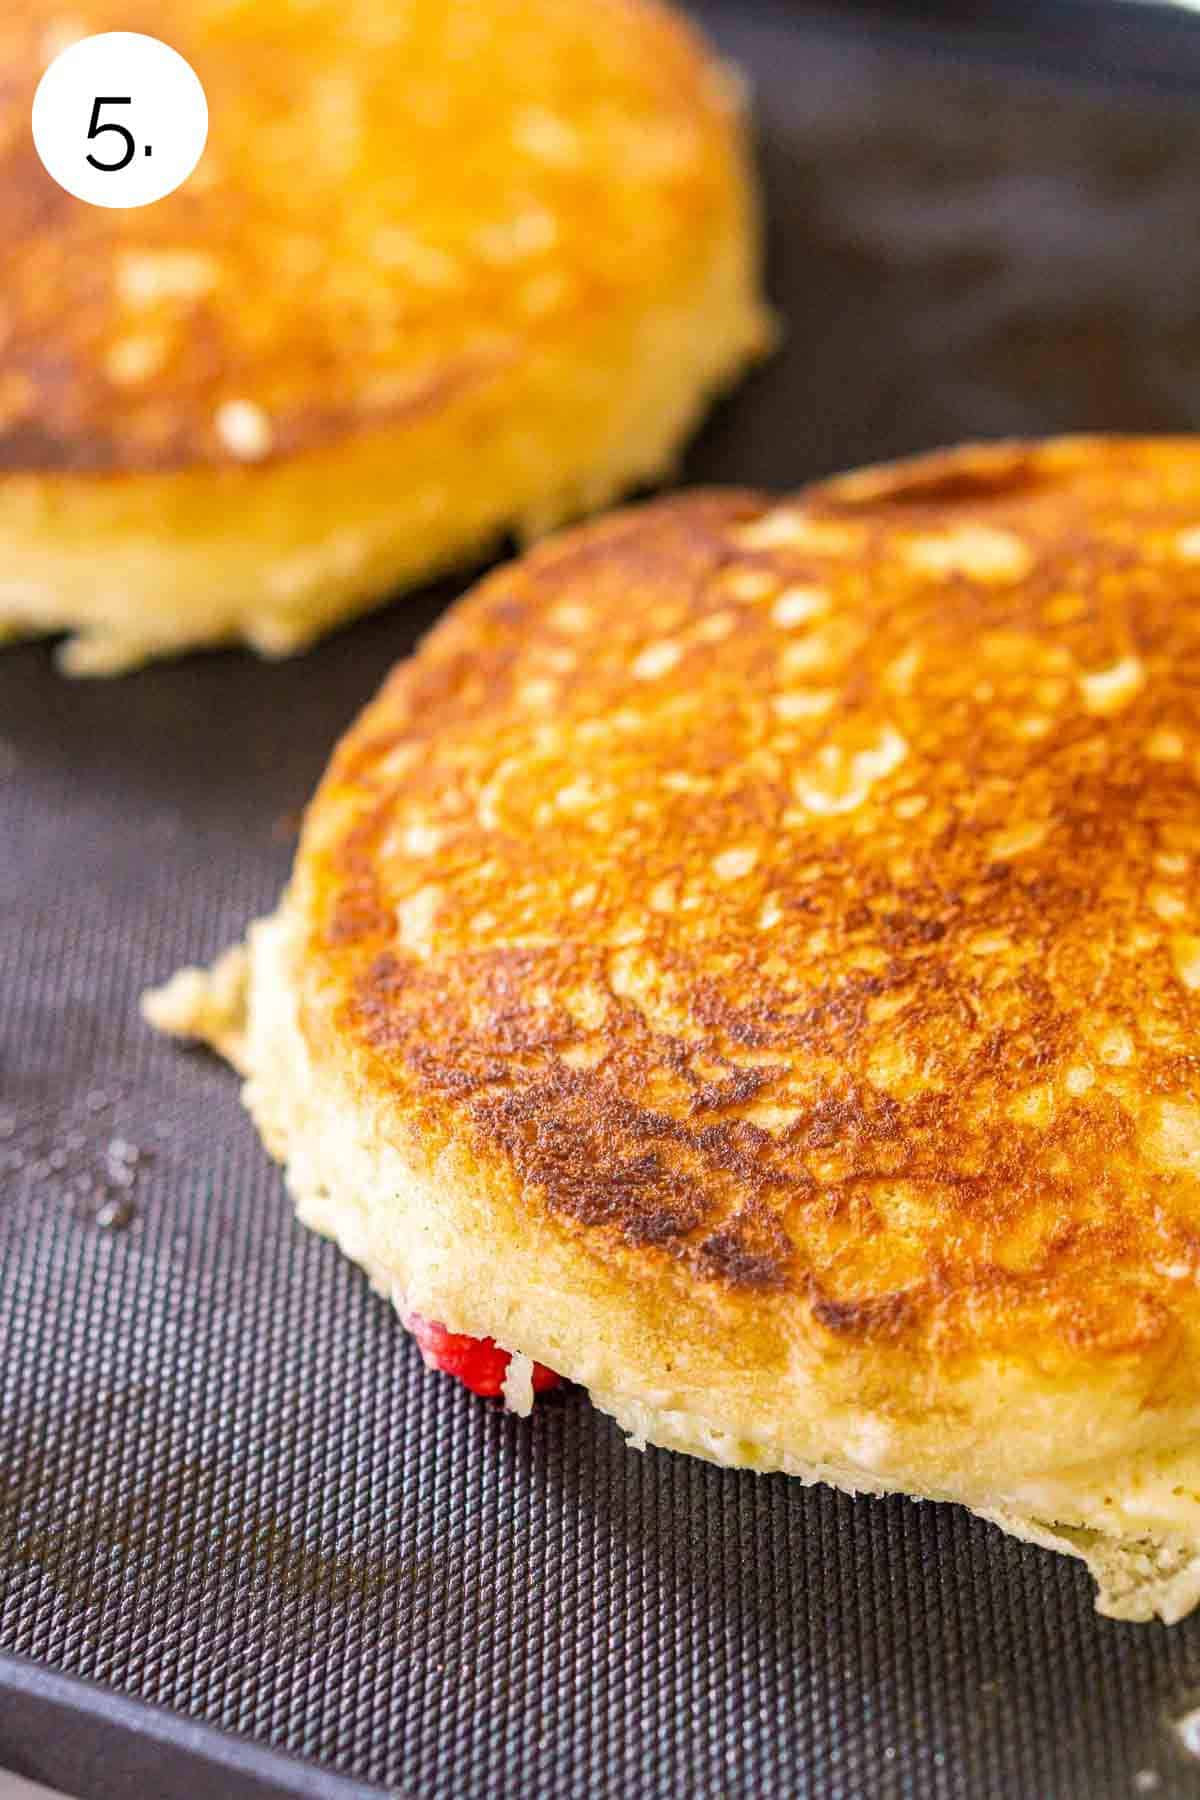 The pancakes cooking on the second side of an electric griddle after the first side turned golden brown.